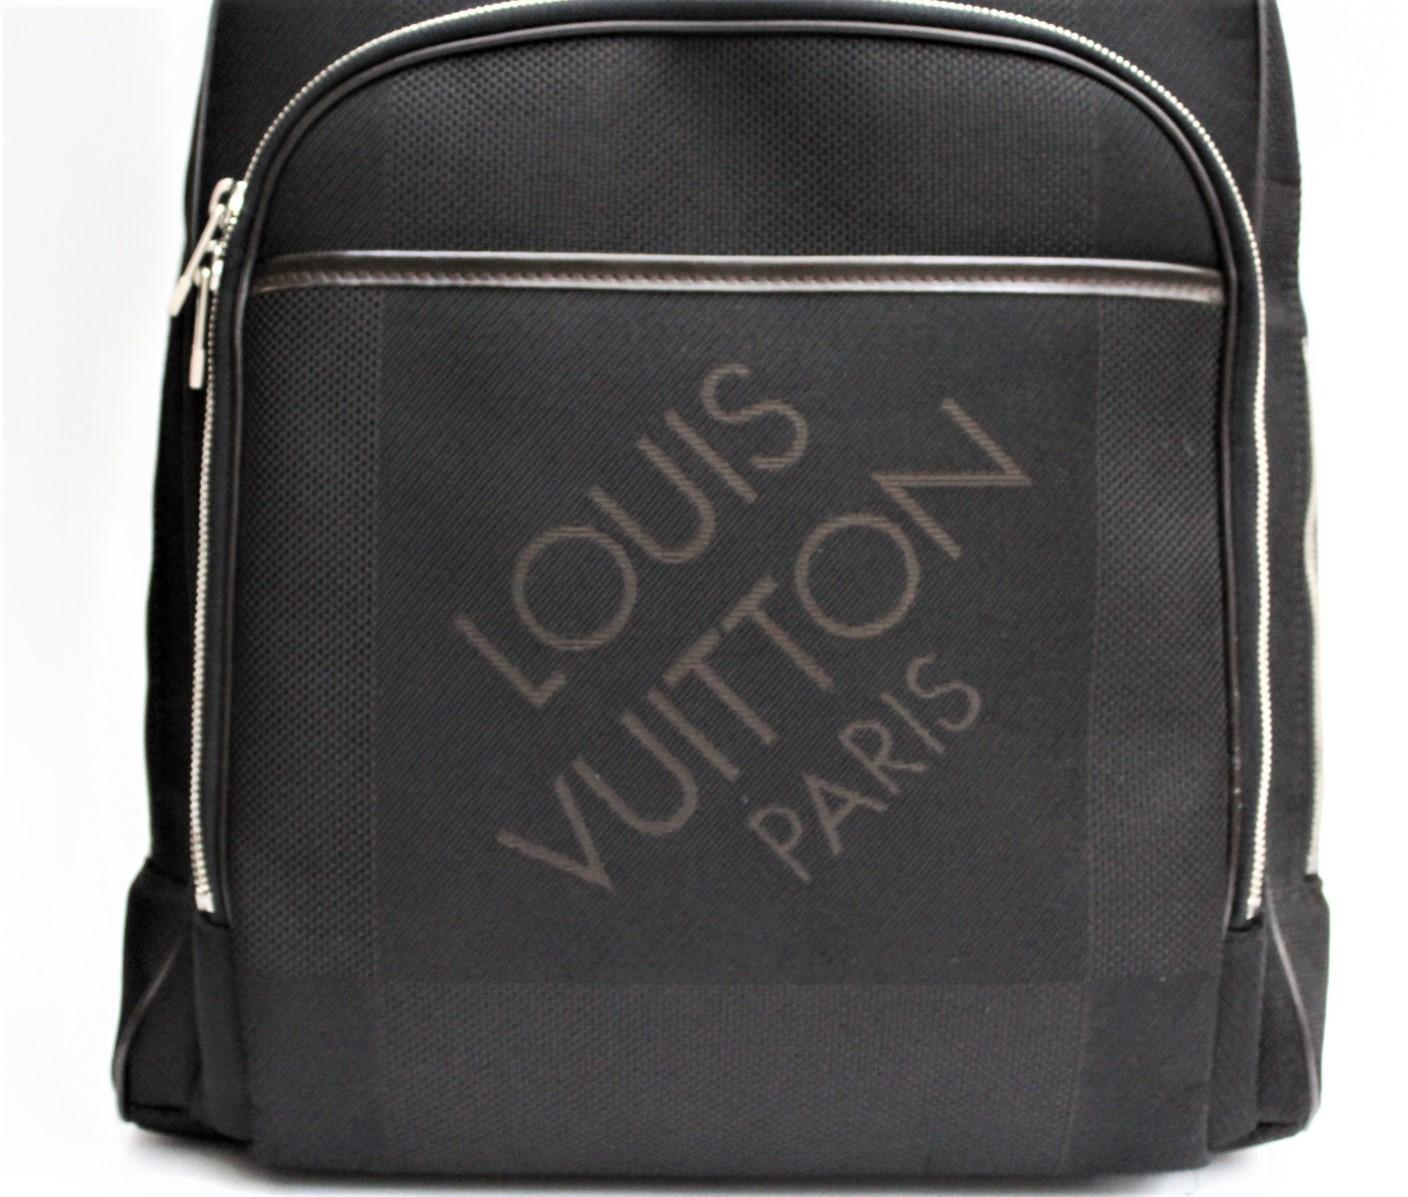 The Louis Vuitton Black Damier Geant Bongo Backpack Bag is great for ultimate hands-free convenience. This backpack is a look that combines classic Louis Vuitton design cues with the latest in high tech materials. This sleek bag offers ample